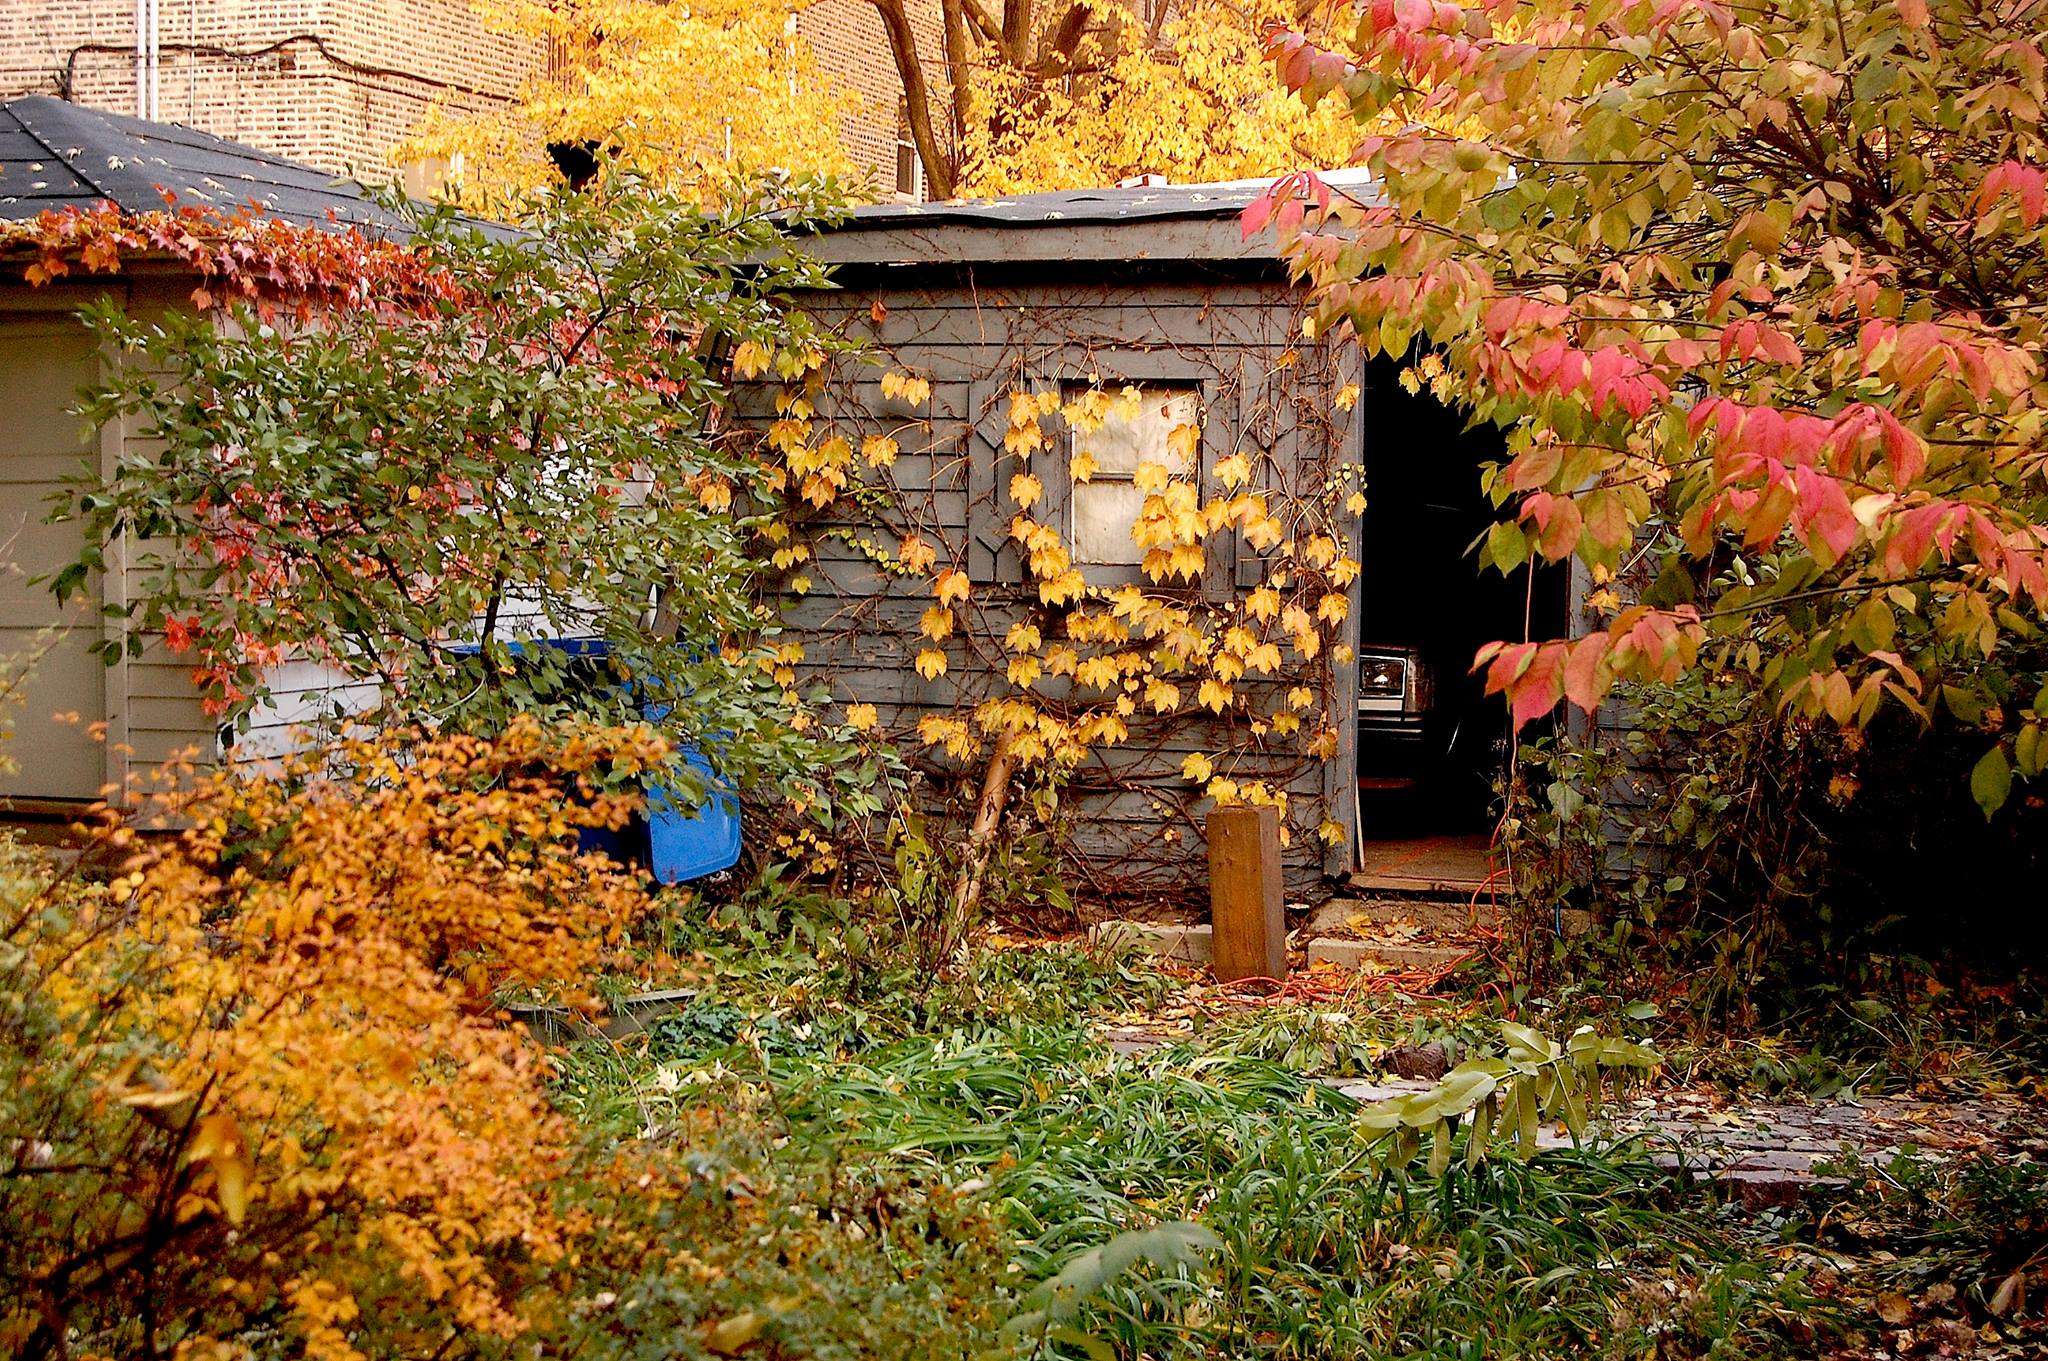 Autumnal landscape in an enclosed backyard with garage visible